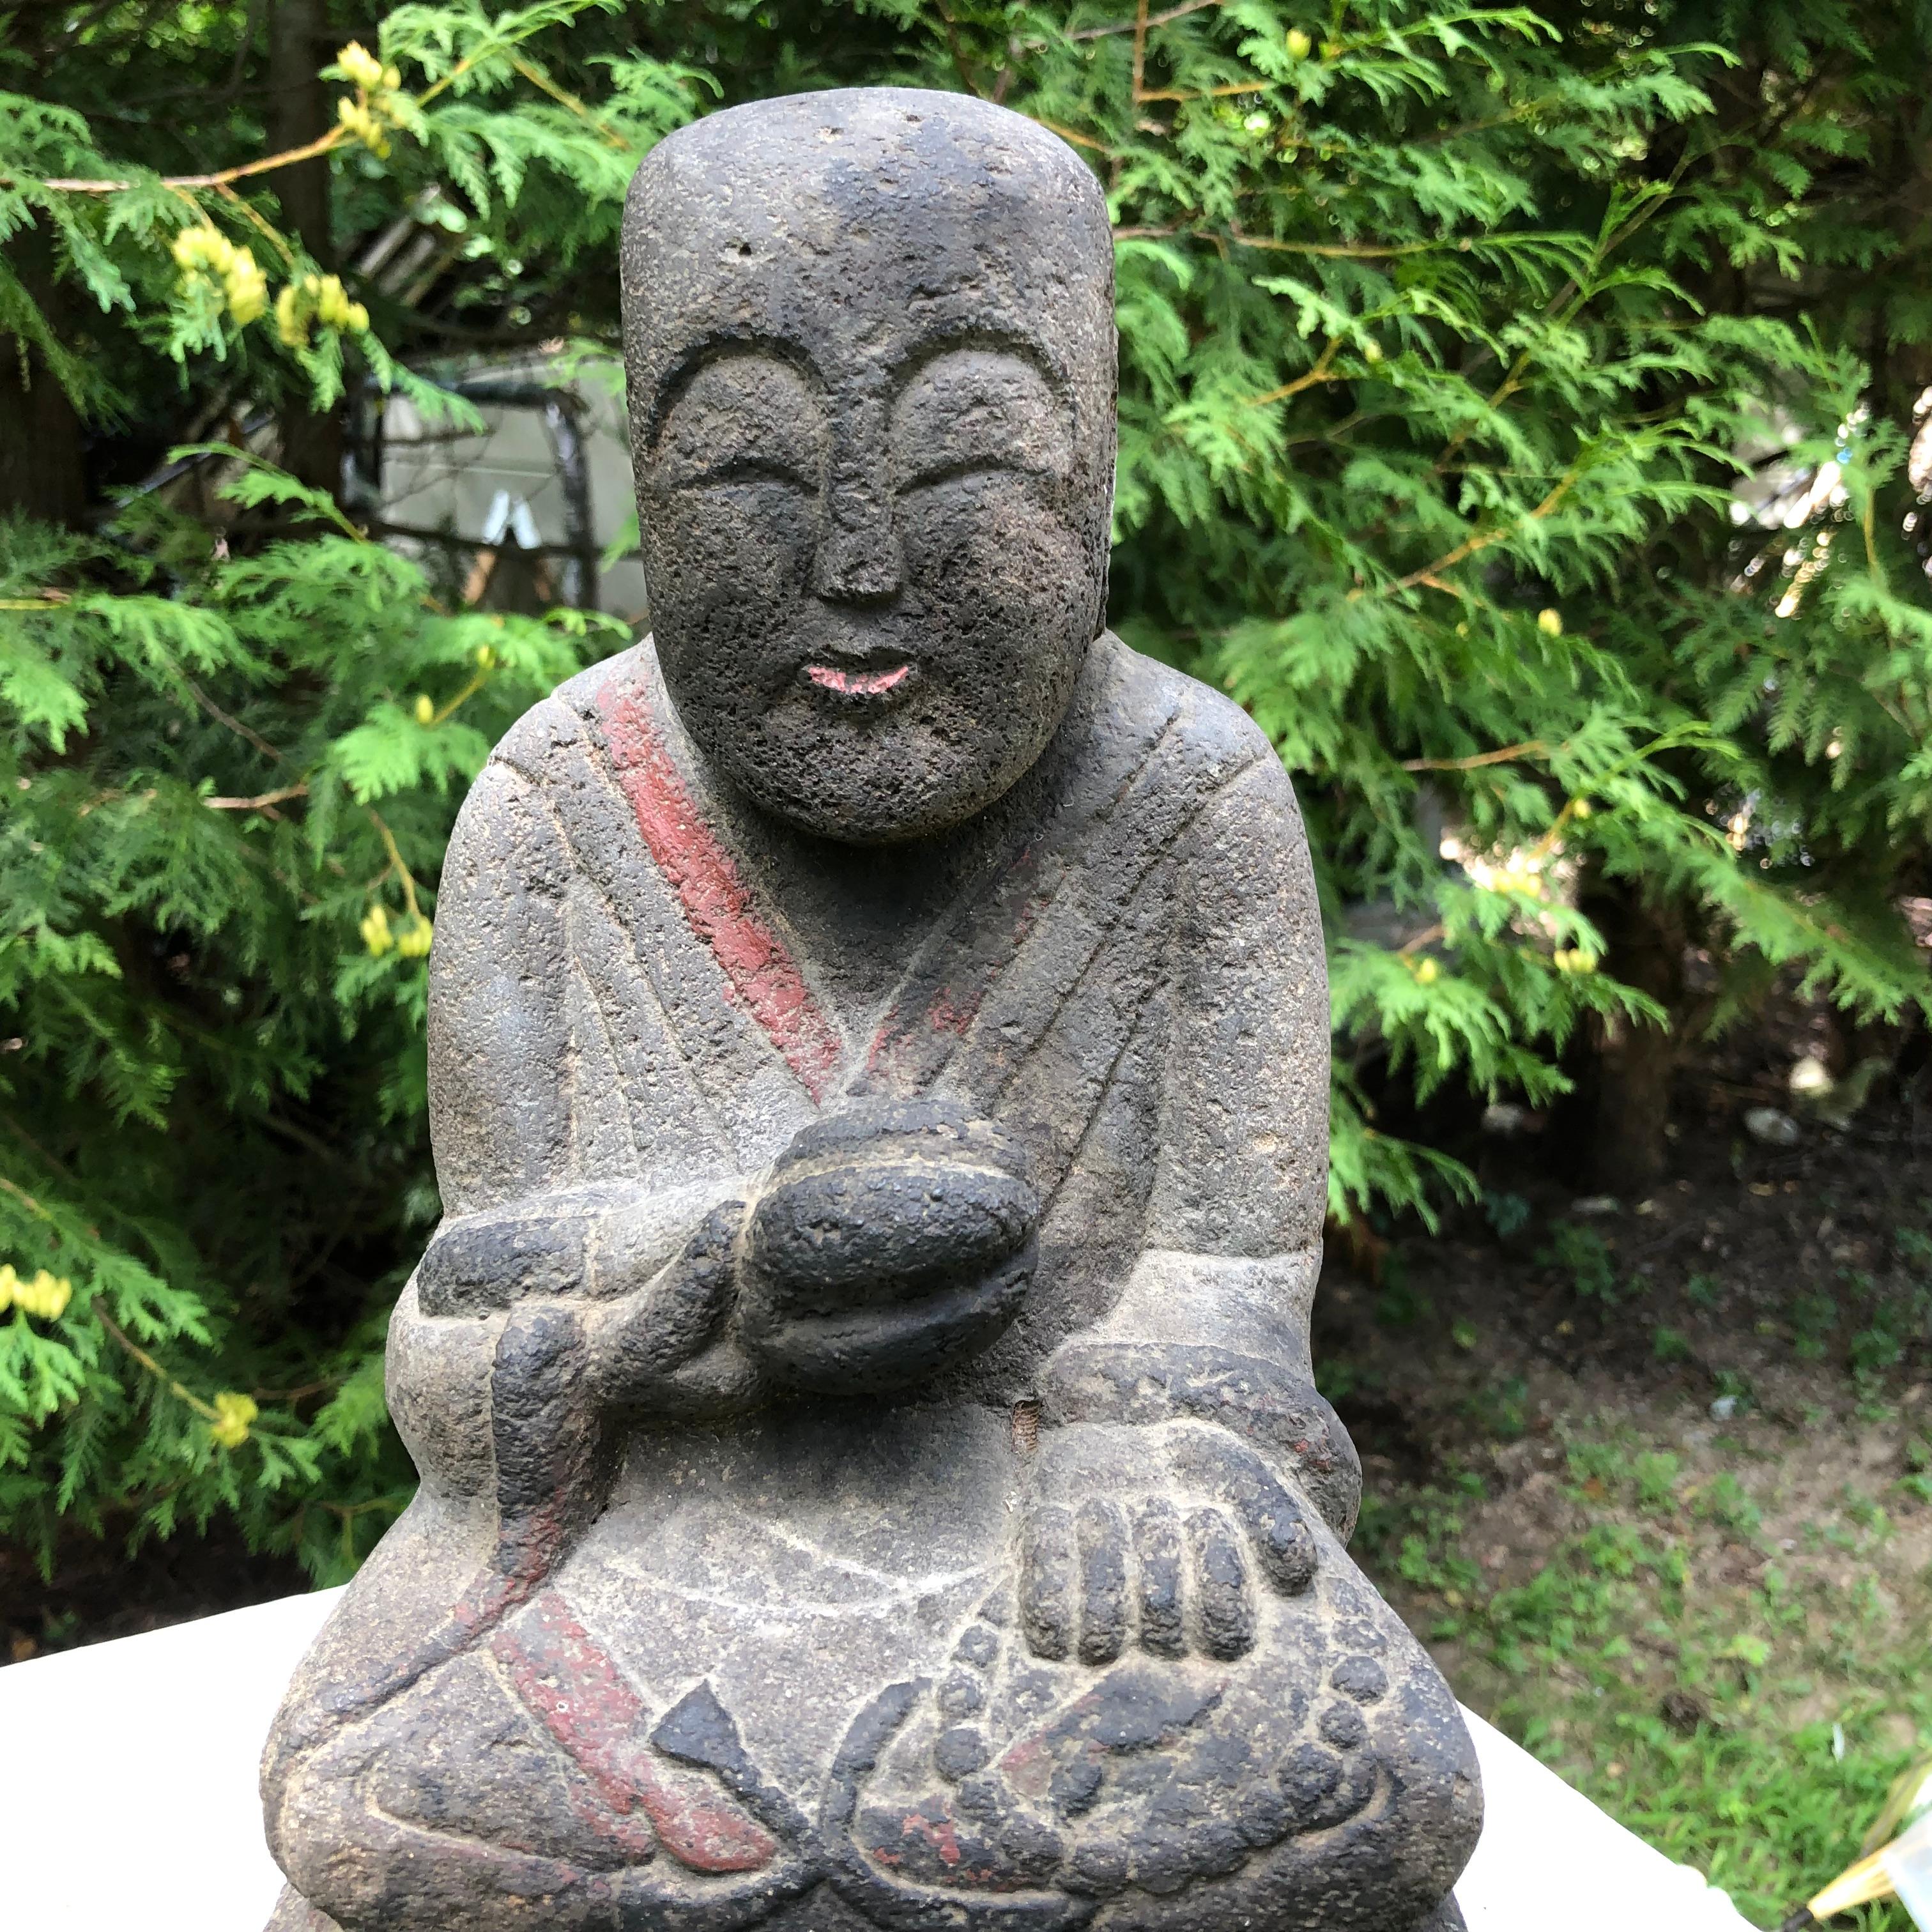 For your special garden

Japan, a fine serene faced hand carved and hand painted stone seated Buddha Holy Man dating to the Taisho period, early 20th century. The effigy of the Buddha with realistic and joyful face hand carved in solid stone and